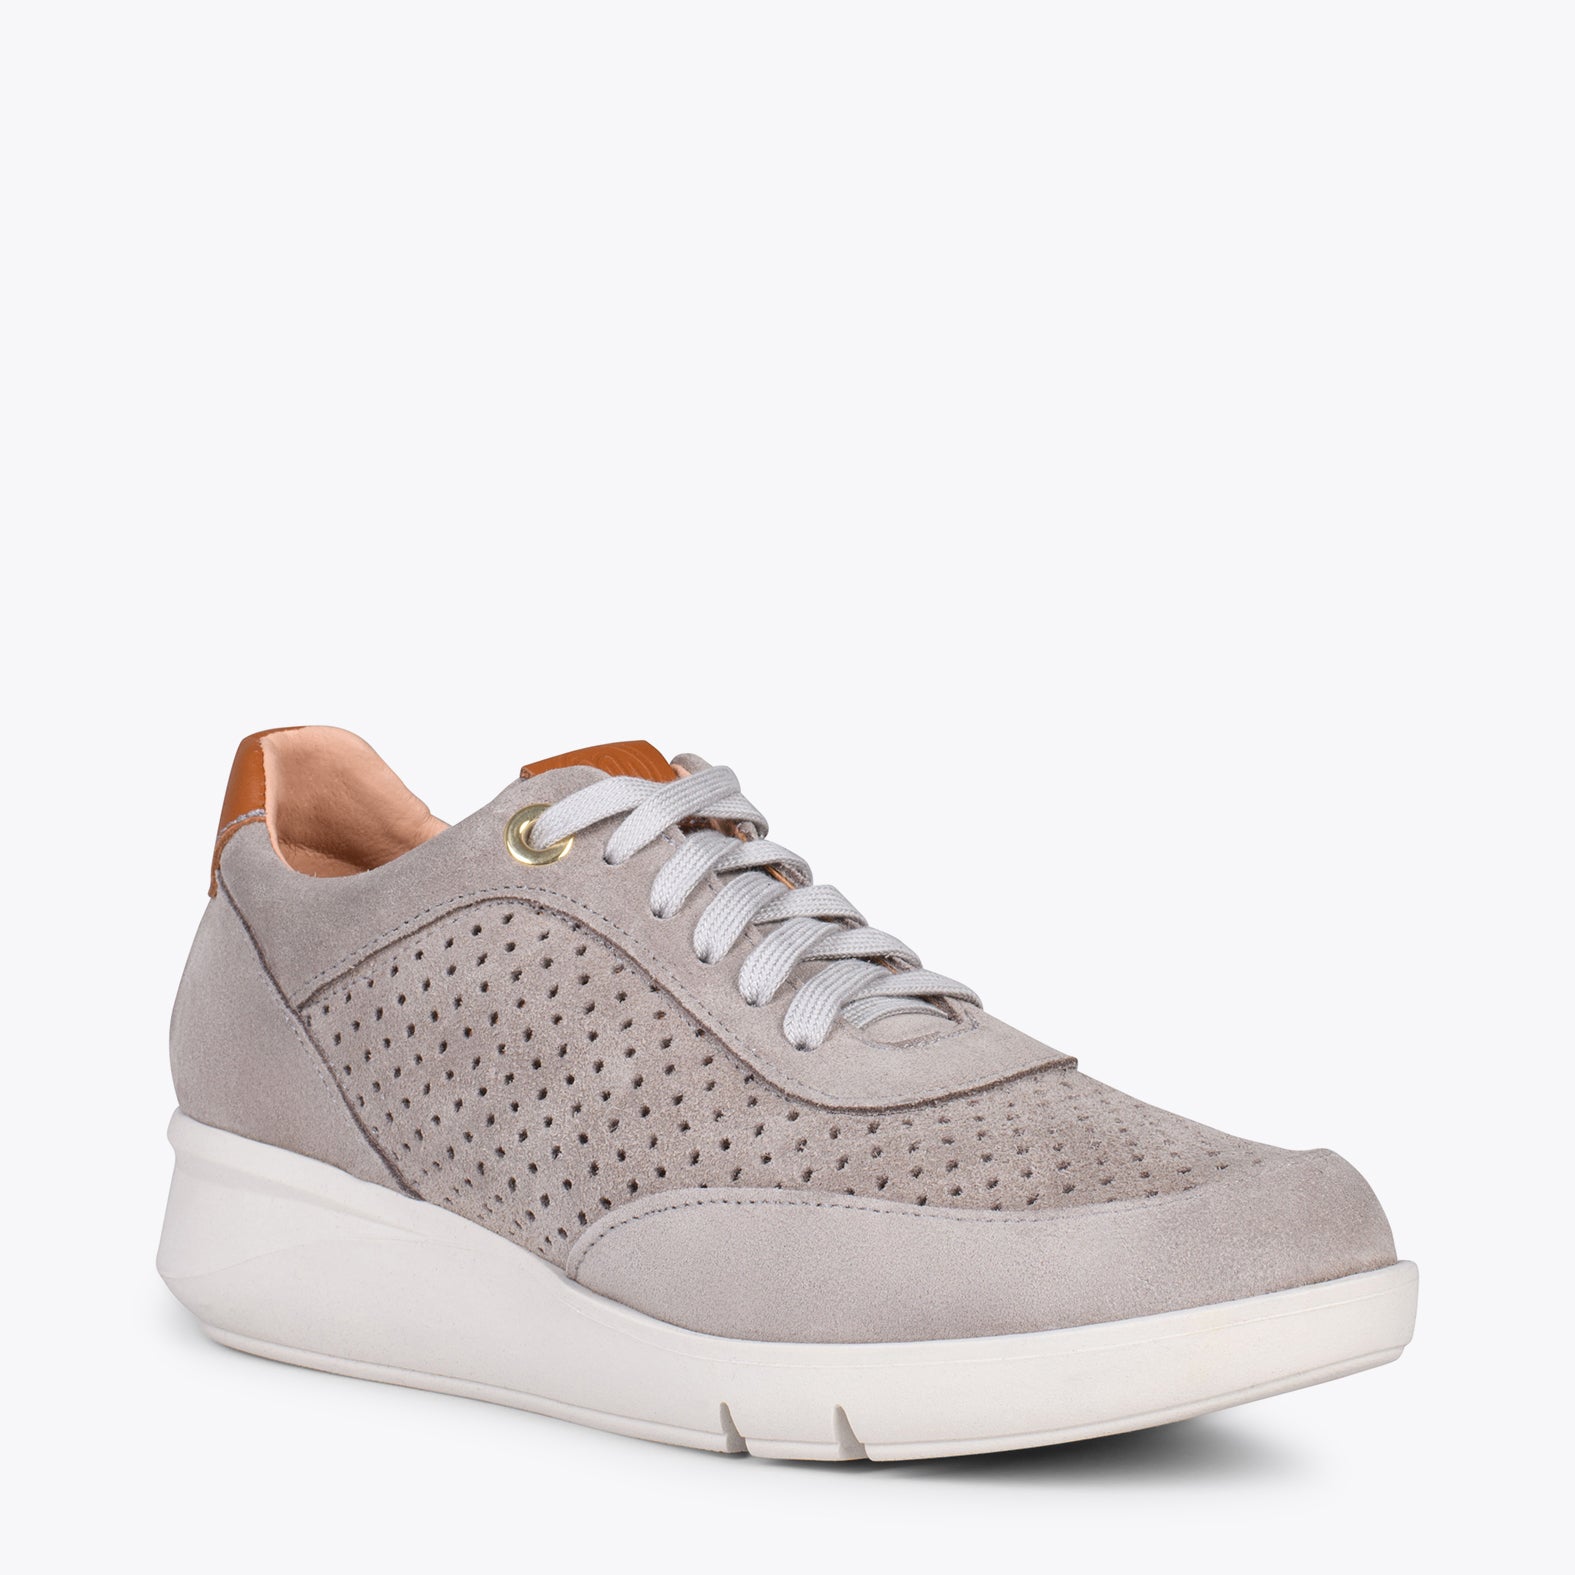 SPORT BLUCHER – TAUPE sneakers with wedge